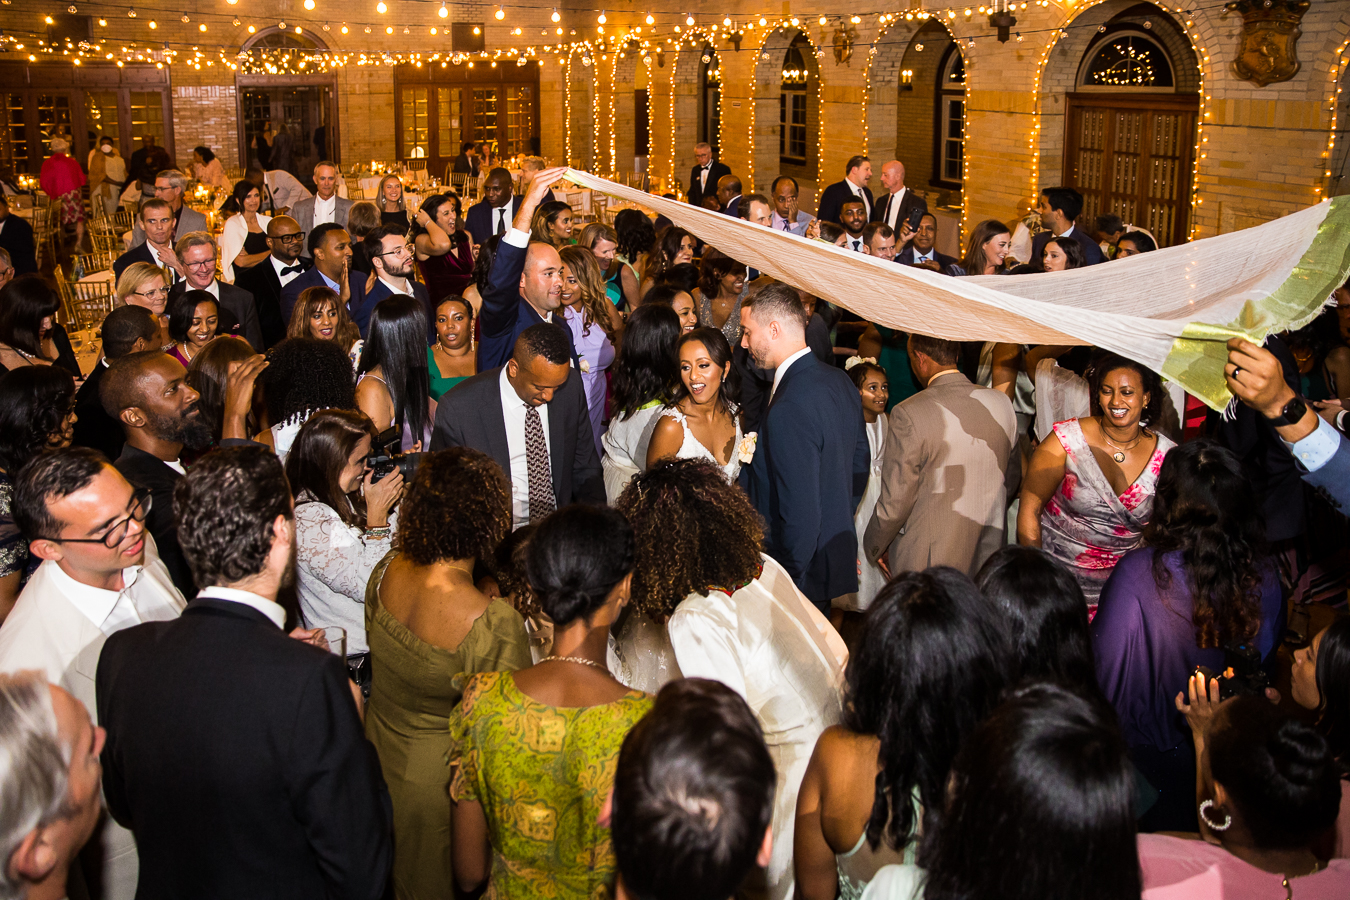 Multicultural DC Wedding photographer, lisa rhinehart, captures this image of the ethiopian bride and her groom underneath a blanket as they celebrate cultural wedding traditions during this st francis hall wedding reception in Washington dc 